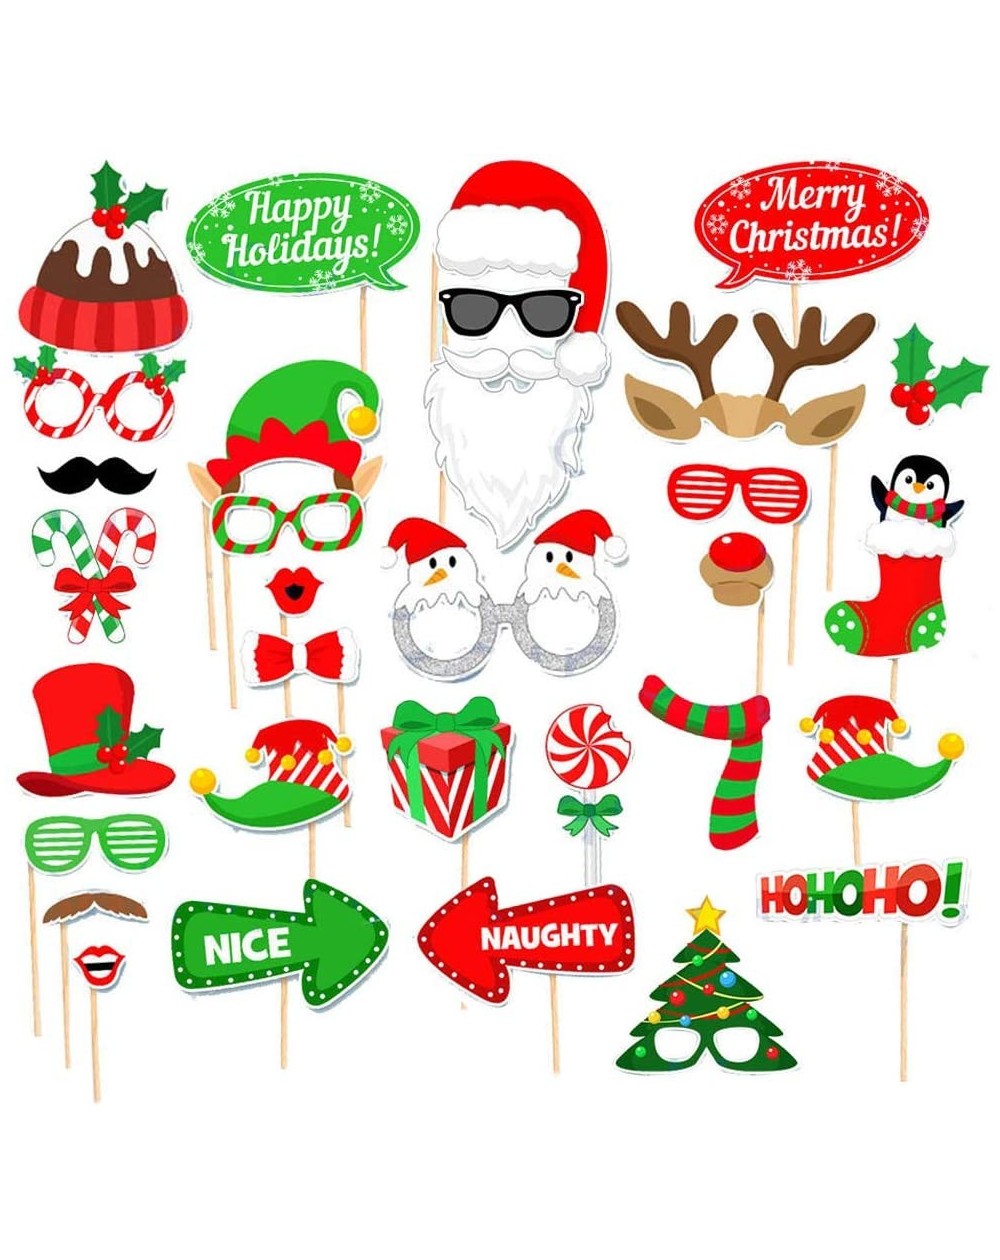 Photobooth Props Christmas Photo Booth Props - Christmas Selfie Props Santa Claus Deer Horn Glasses Funny Christmas Party Dec...